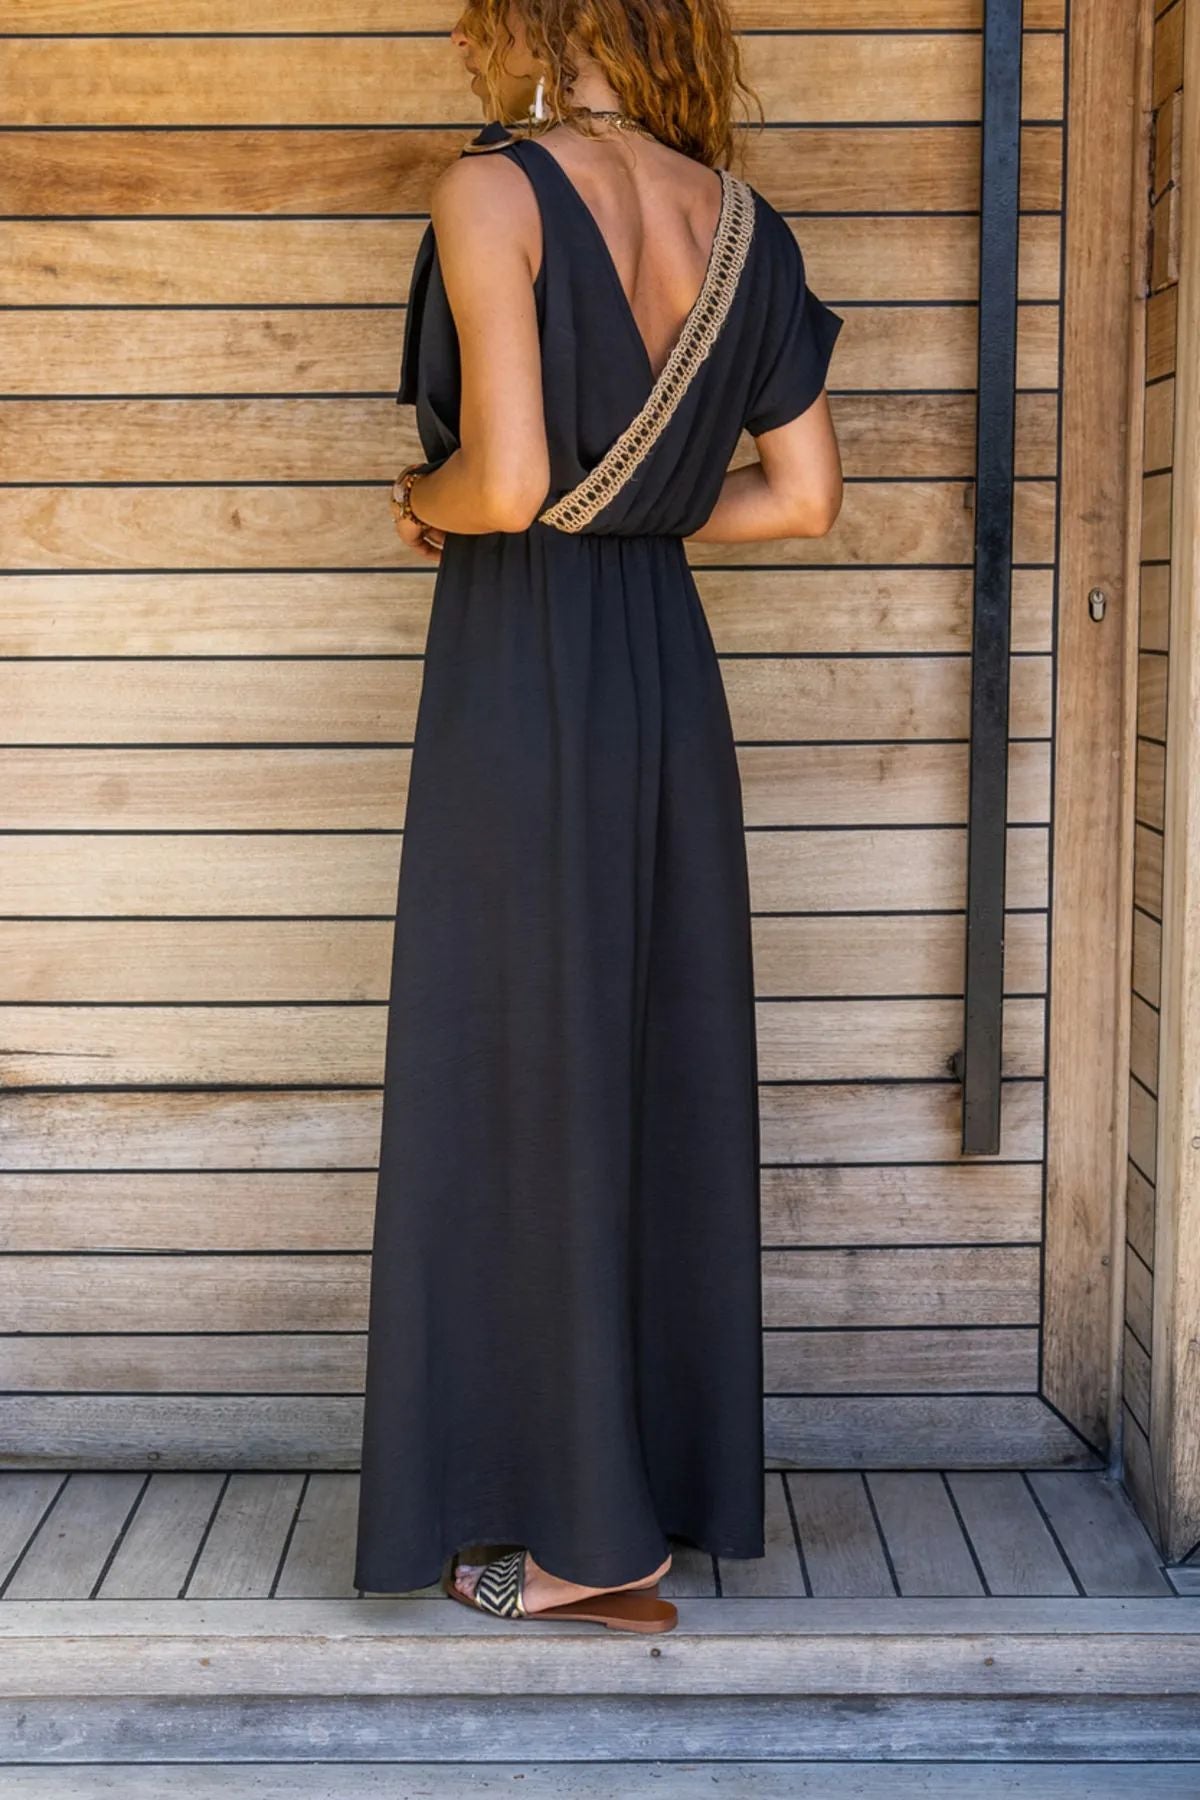 Loose-Fit Black Women's Dress - Sexy Wrap Neckline, Half Sleeves with Long Length and Woven Embroidery for Chic Look